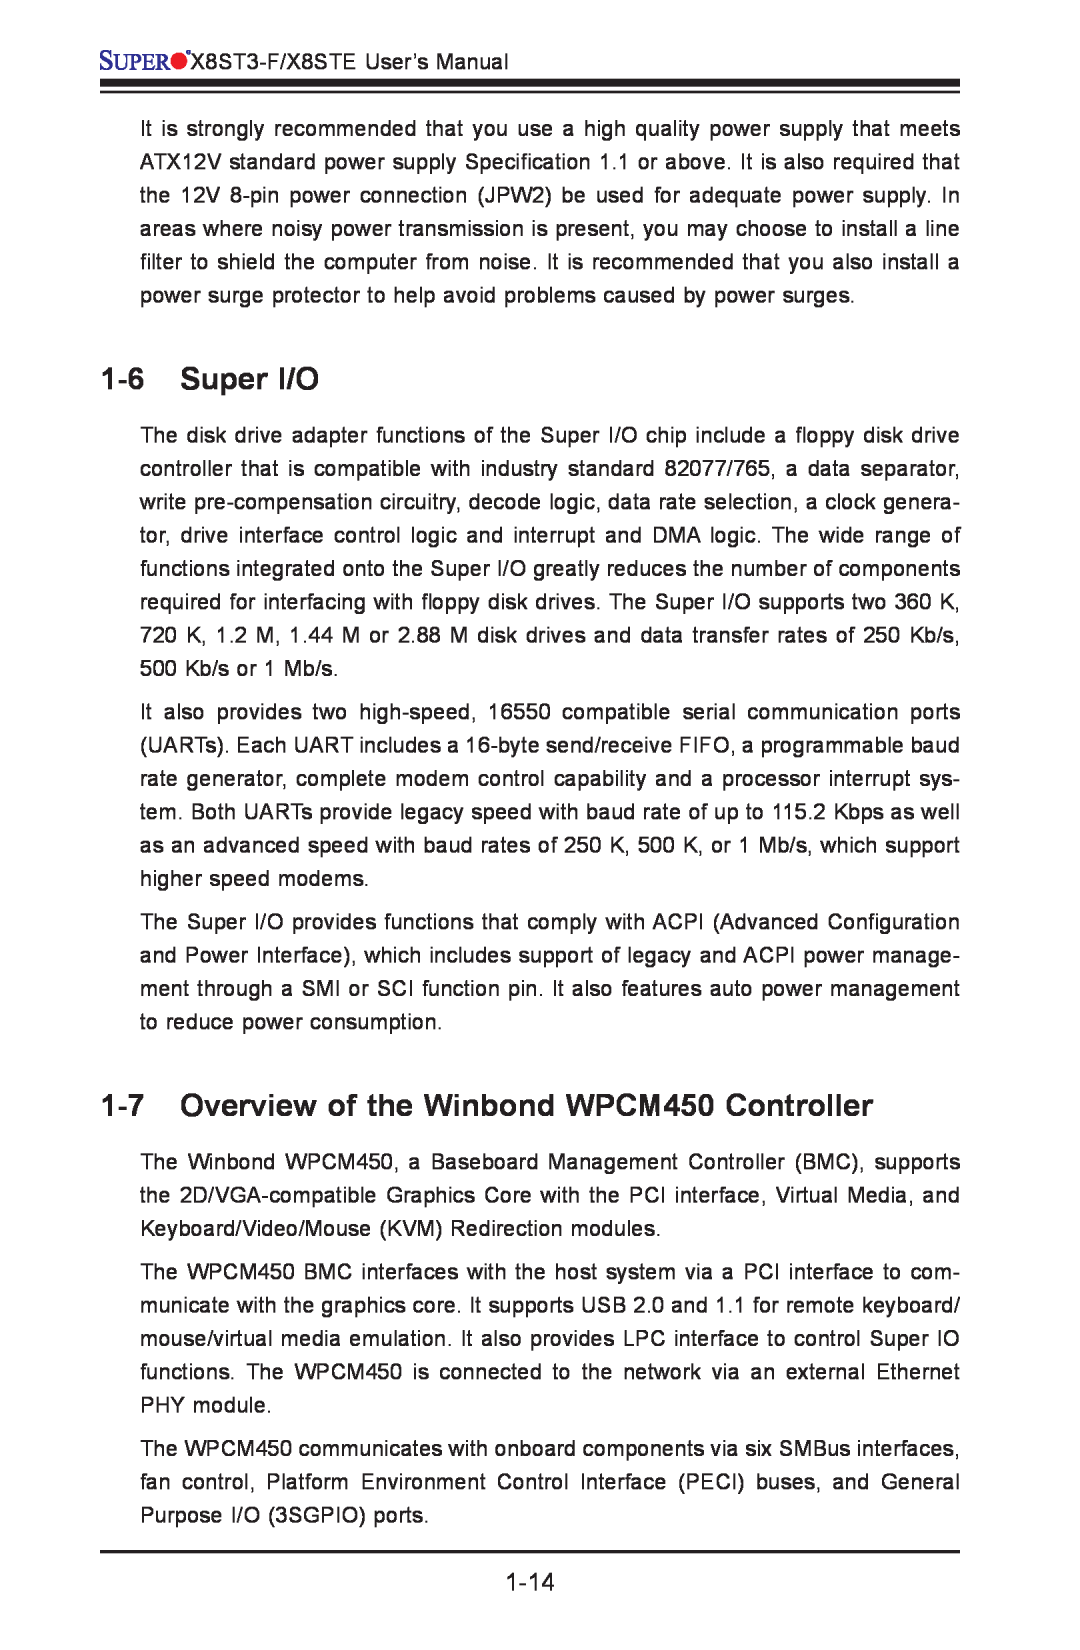 SUPER MICRO Computer X8ST3-F, X8STE user manual Super I/O, Overview of the Winbond WPCM450 Controller, 1-14 